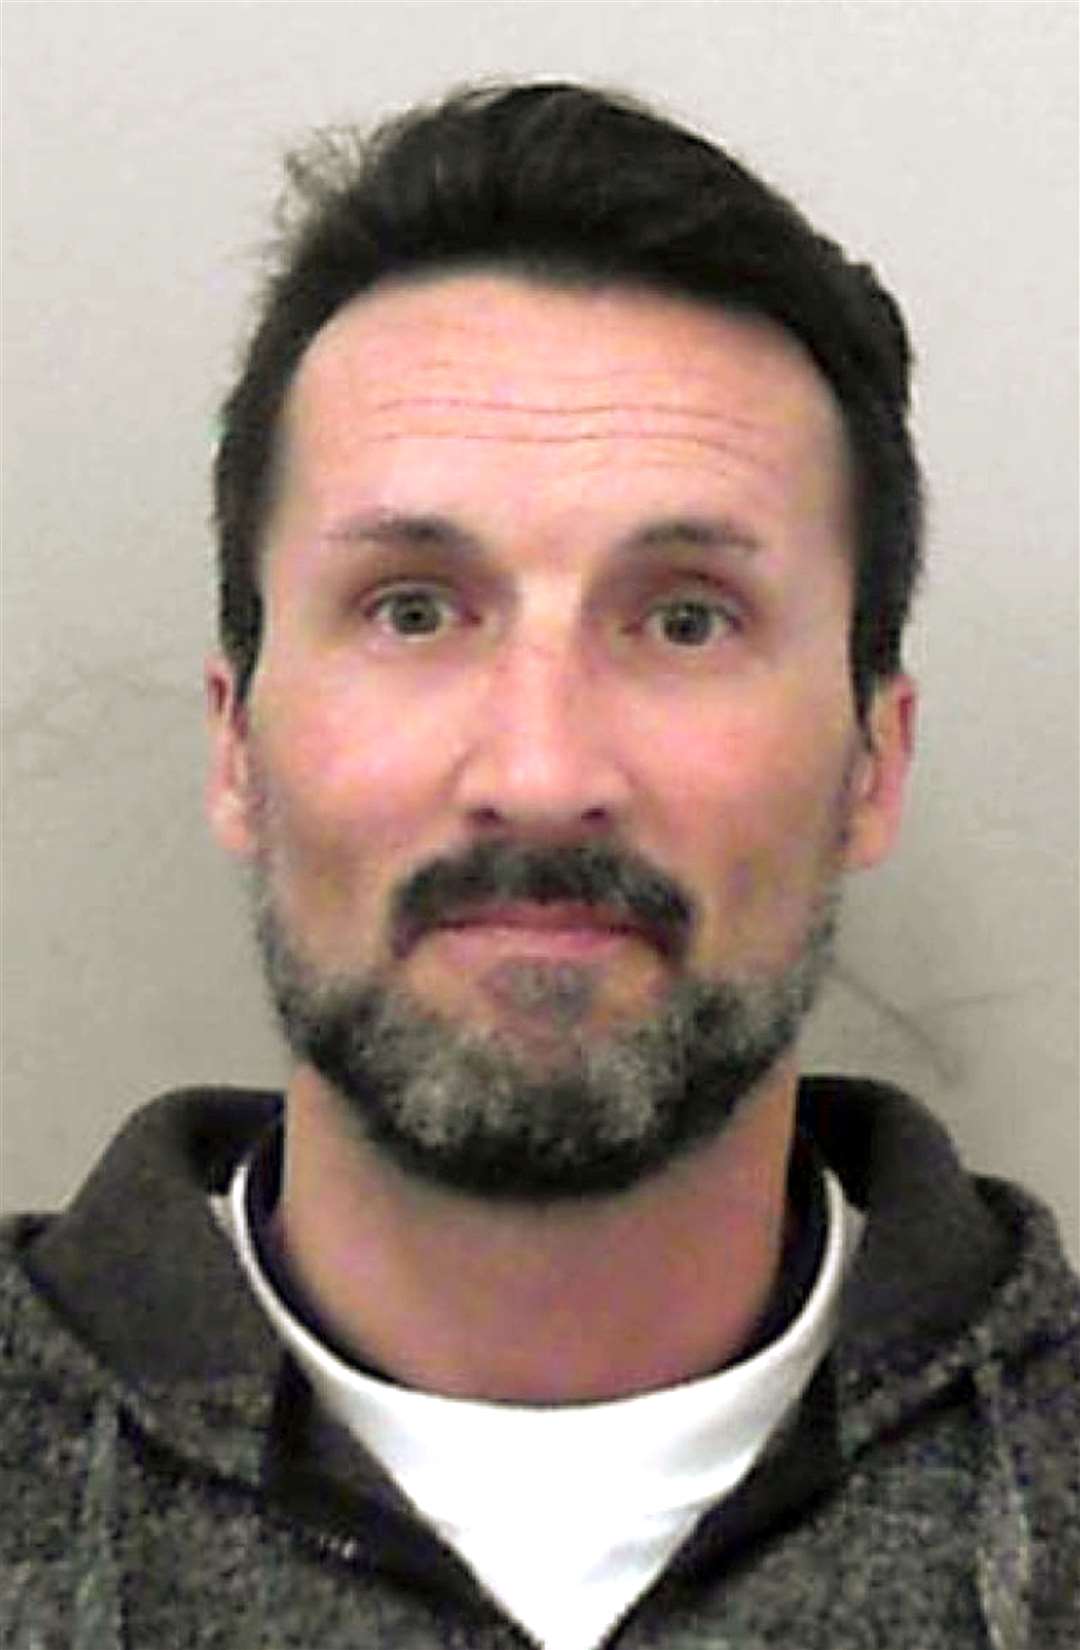 Mark Acklom was jailed in the UK in 2019 before being extradited to Spain (Avon and Somerset Police/PA)